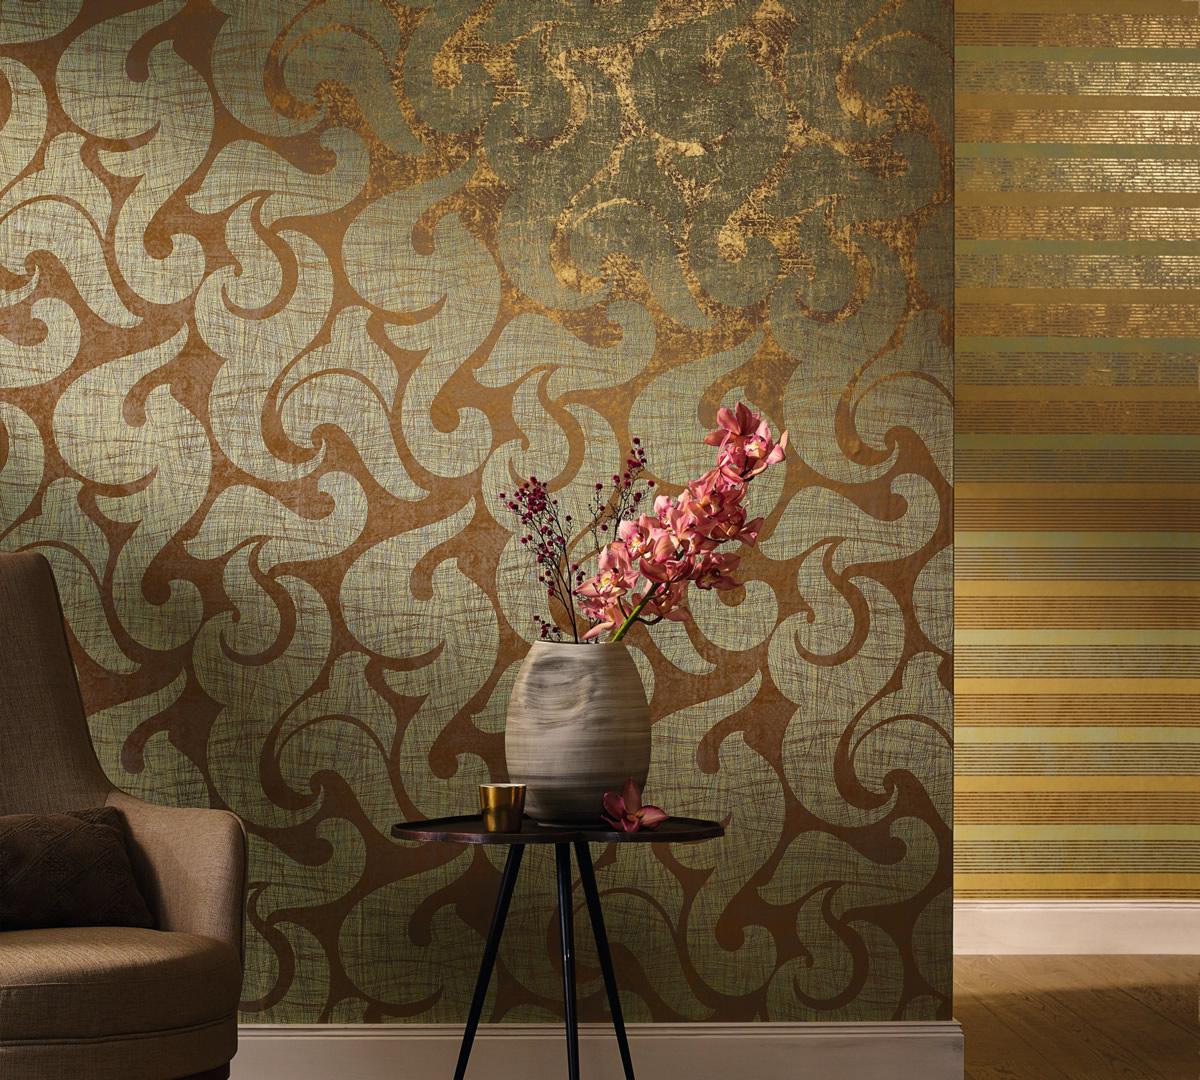 Impressionistic pattern of the golden wallpaper